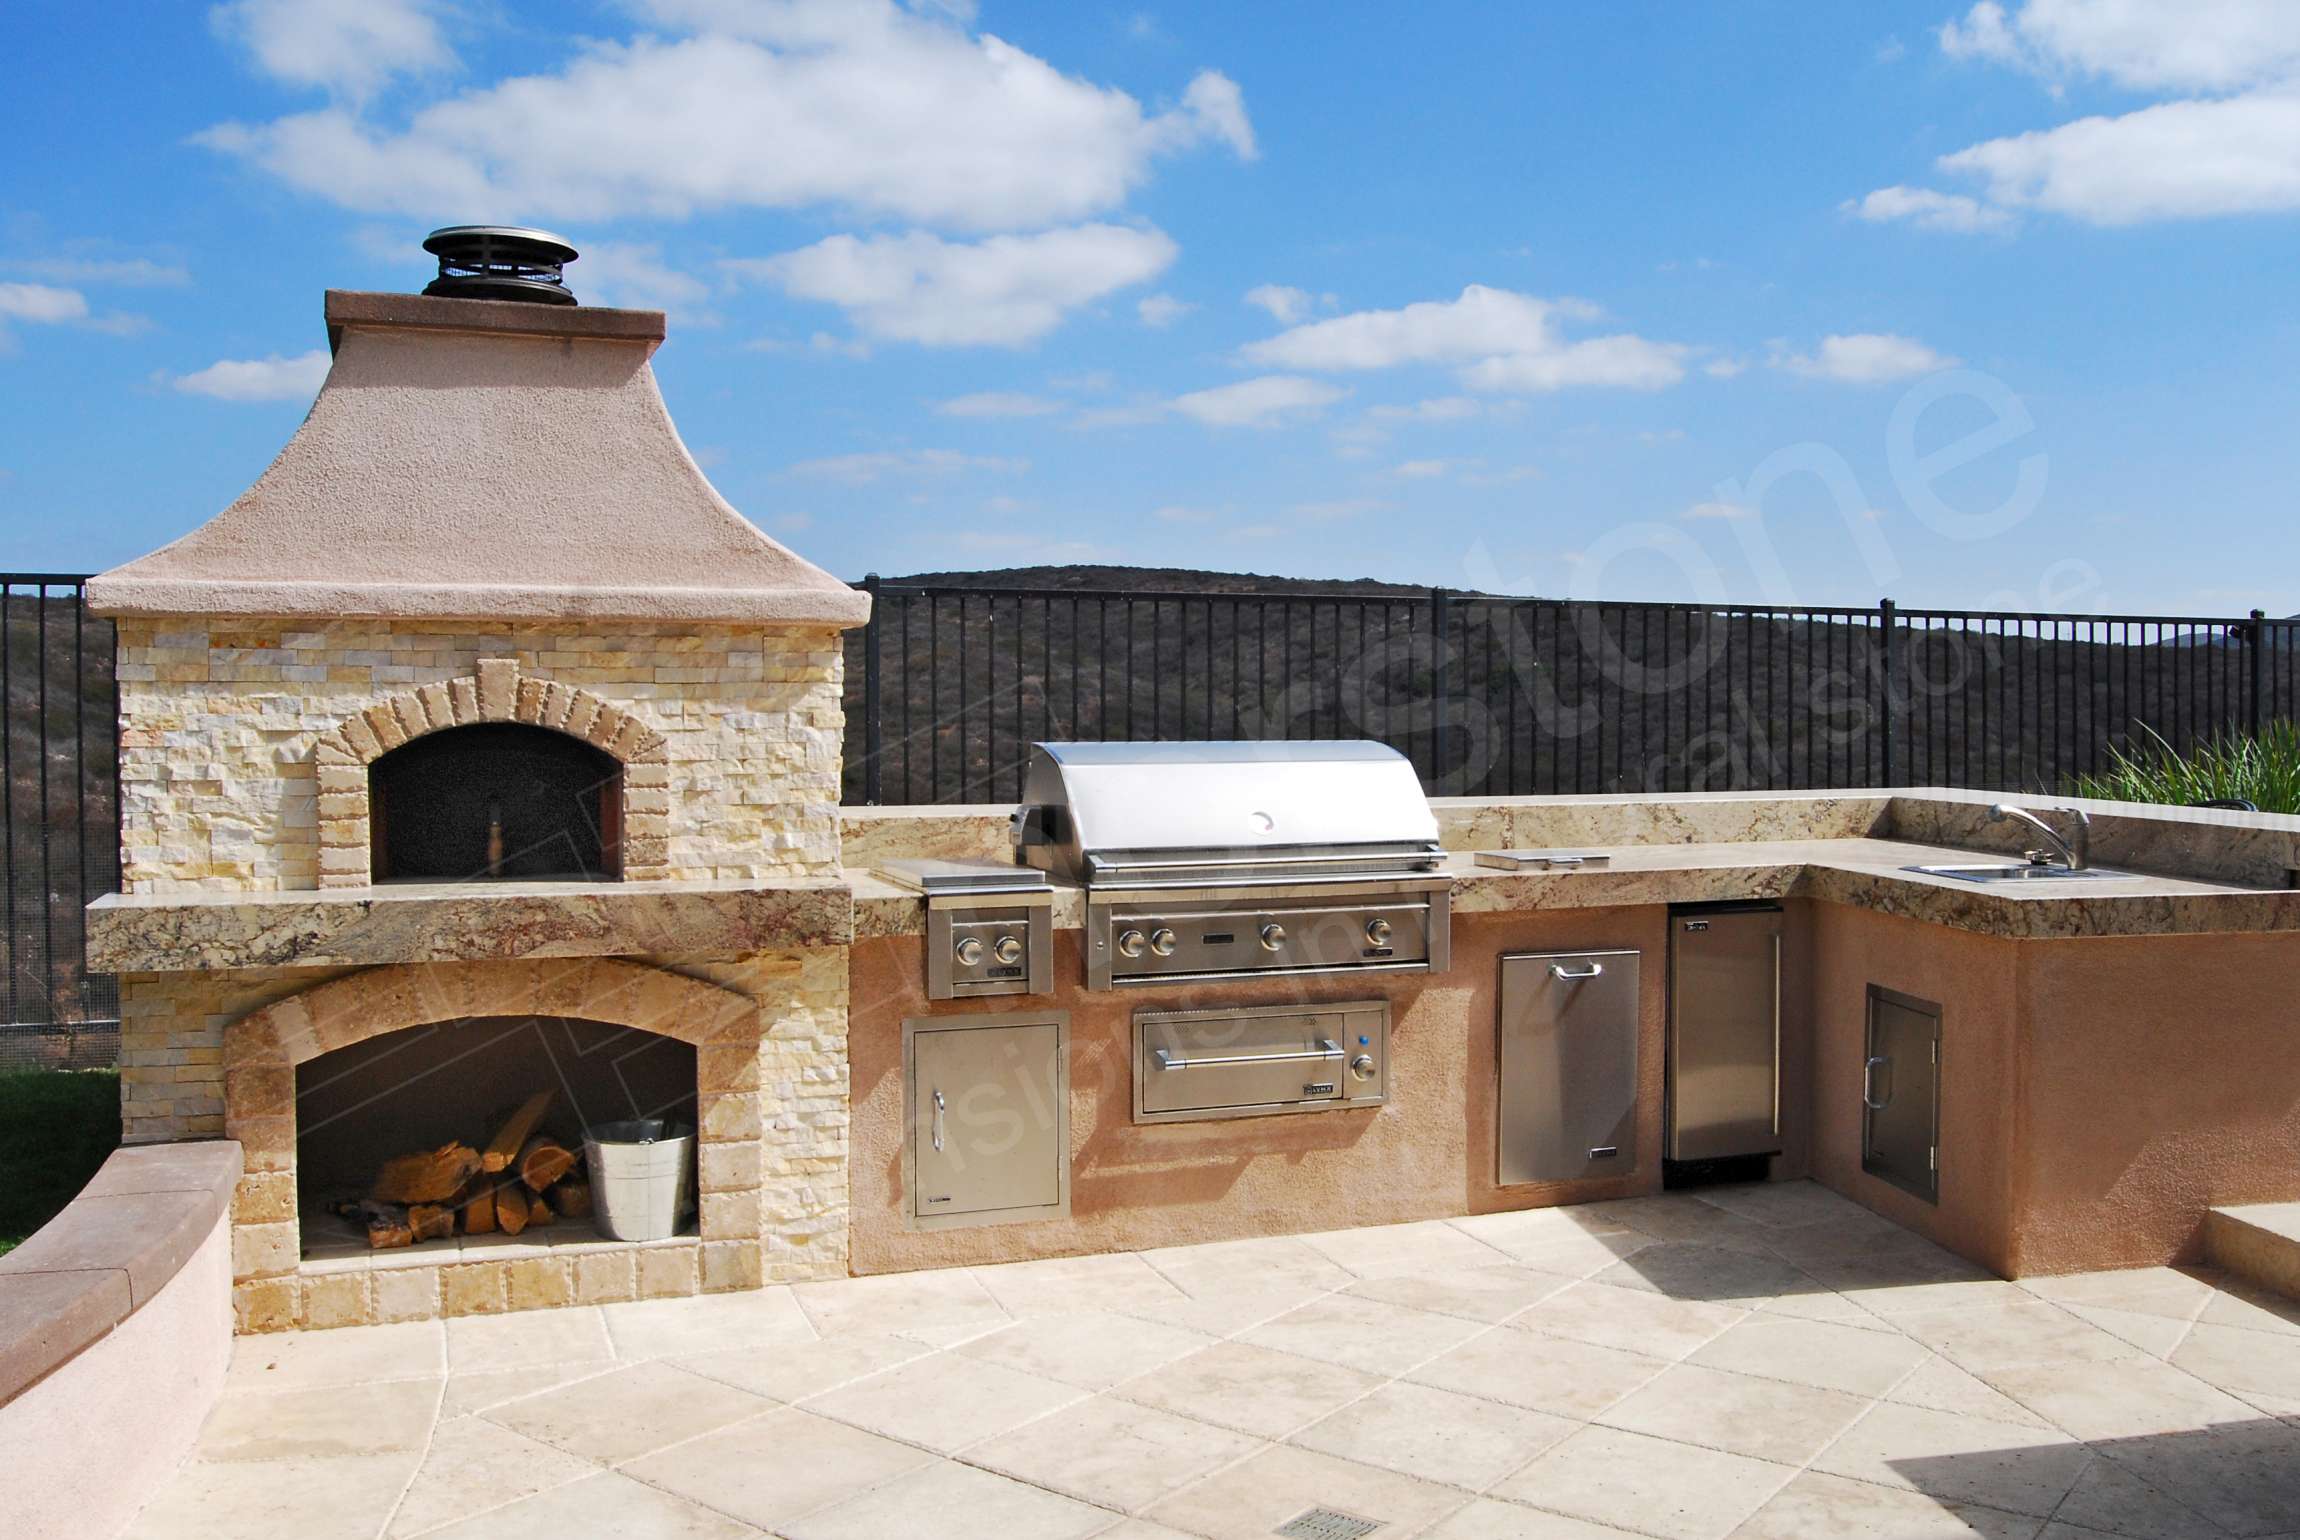 Norstone Ivory Stacked Stone Rock Panels on Outdoor Backyard Pizza Oven